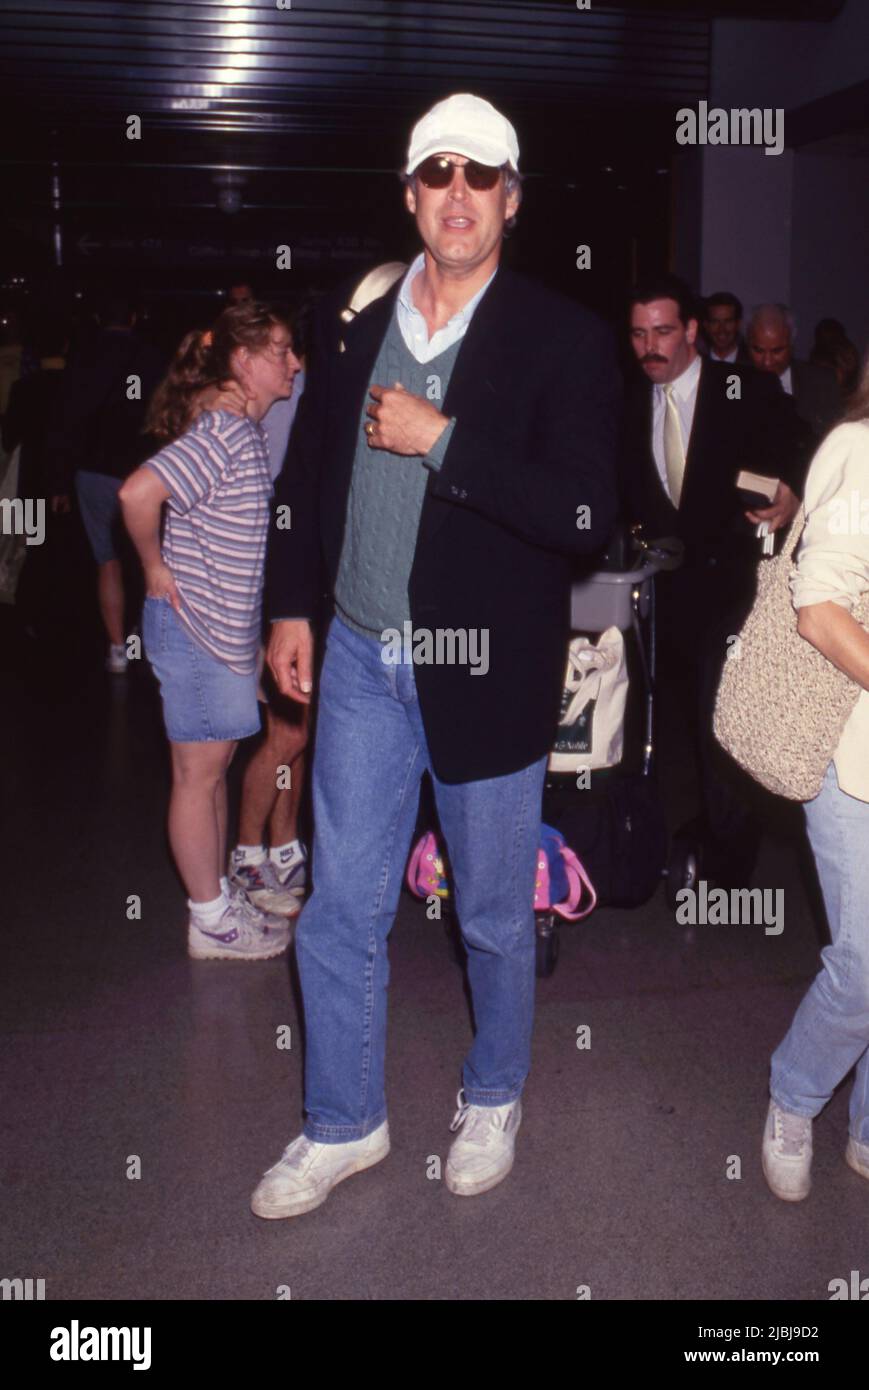 Chevy Chase 1994 Credit: Ralph Dominguez/MediaPunch Stock Photo - Alamy